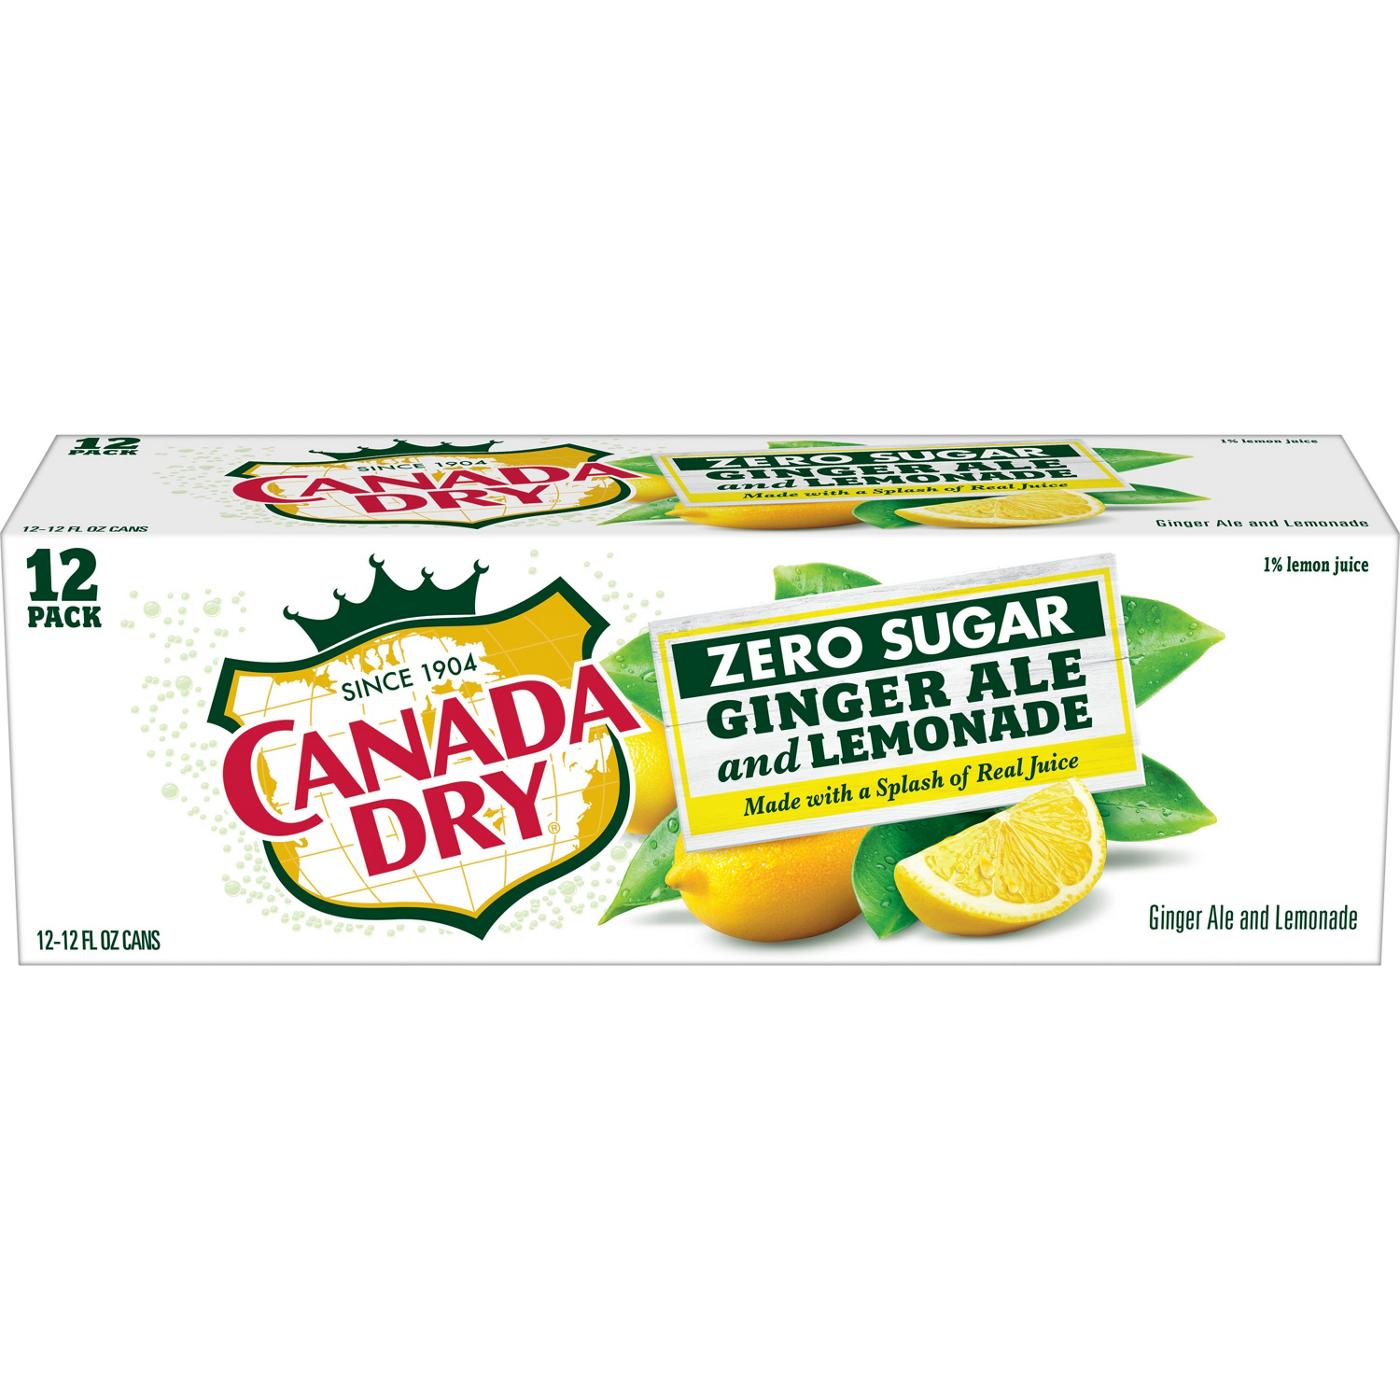 Canada Dry Diet Ginger Ale And Lemonade 12 oz Cans; image 1 of 5